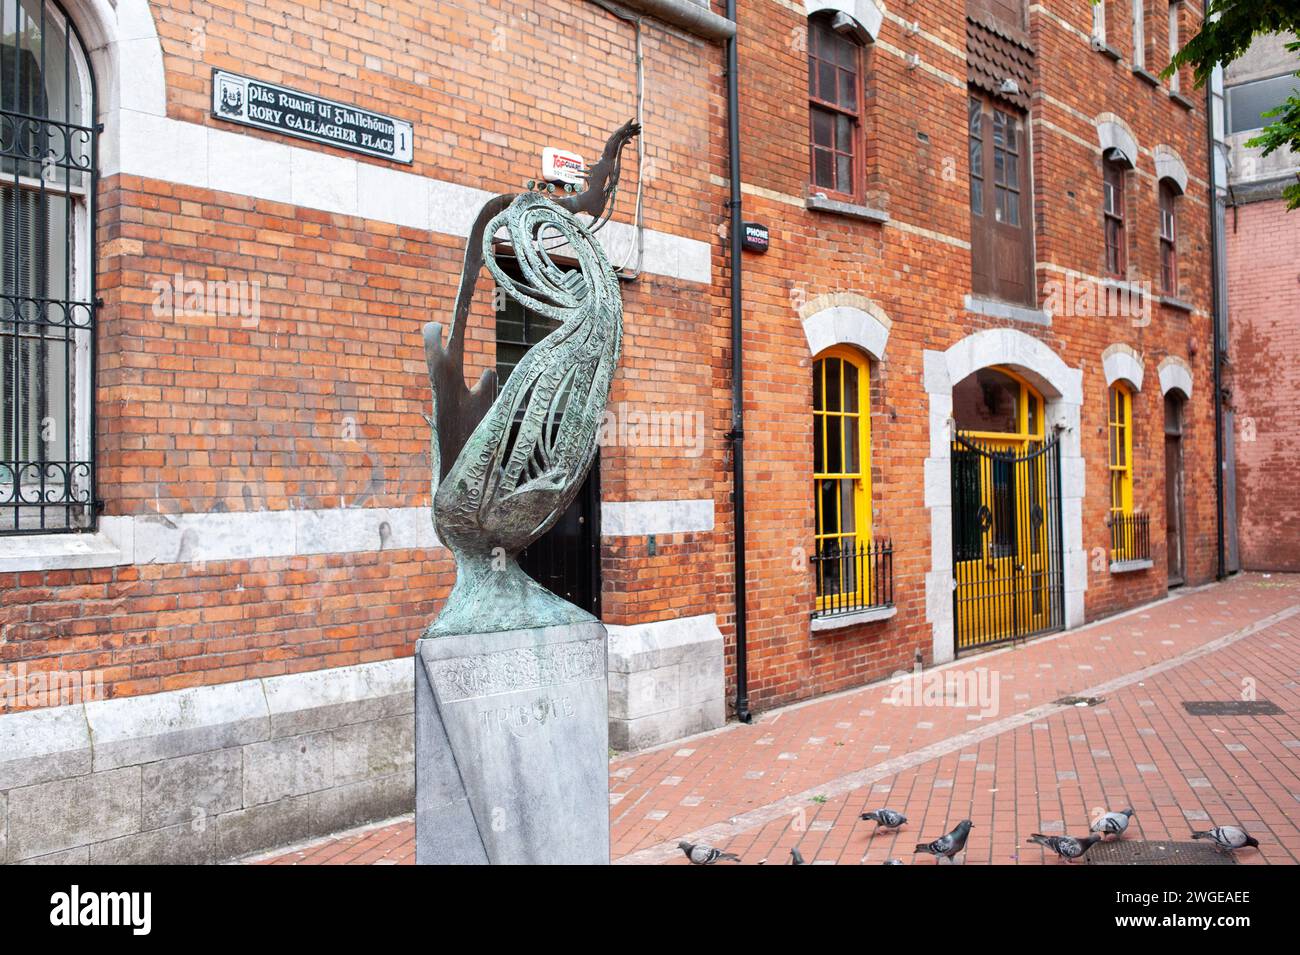 Rory Gallagher Memorial Sculpture in cork city. Honorary bronze statue of the renowned native rock & blues guitarist in a plaza dedicated to him. Stock Photo